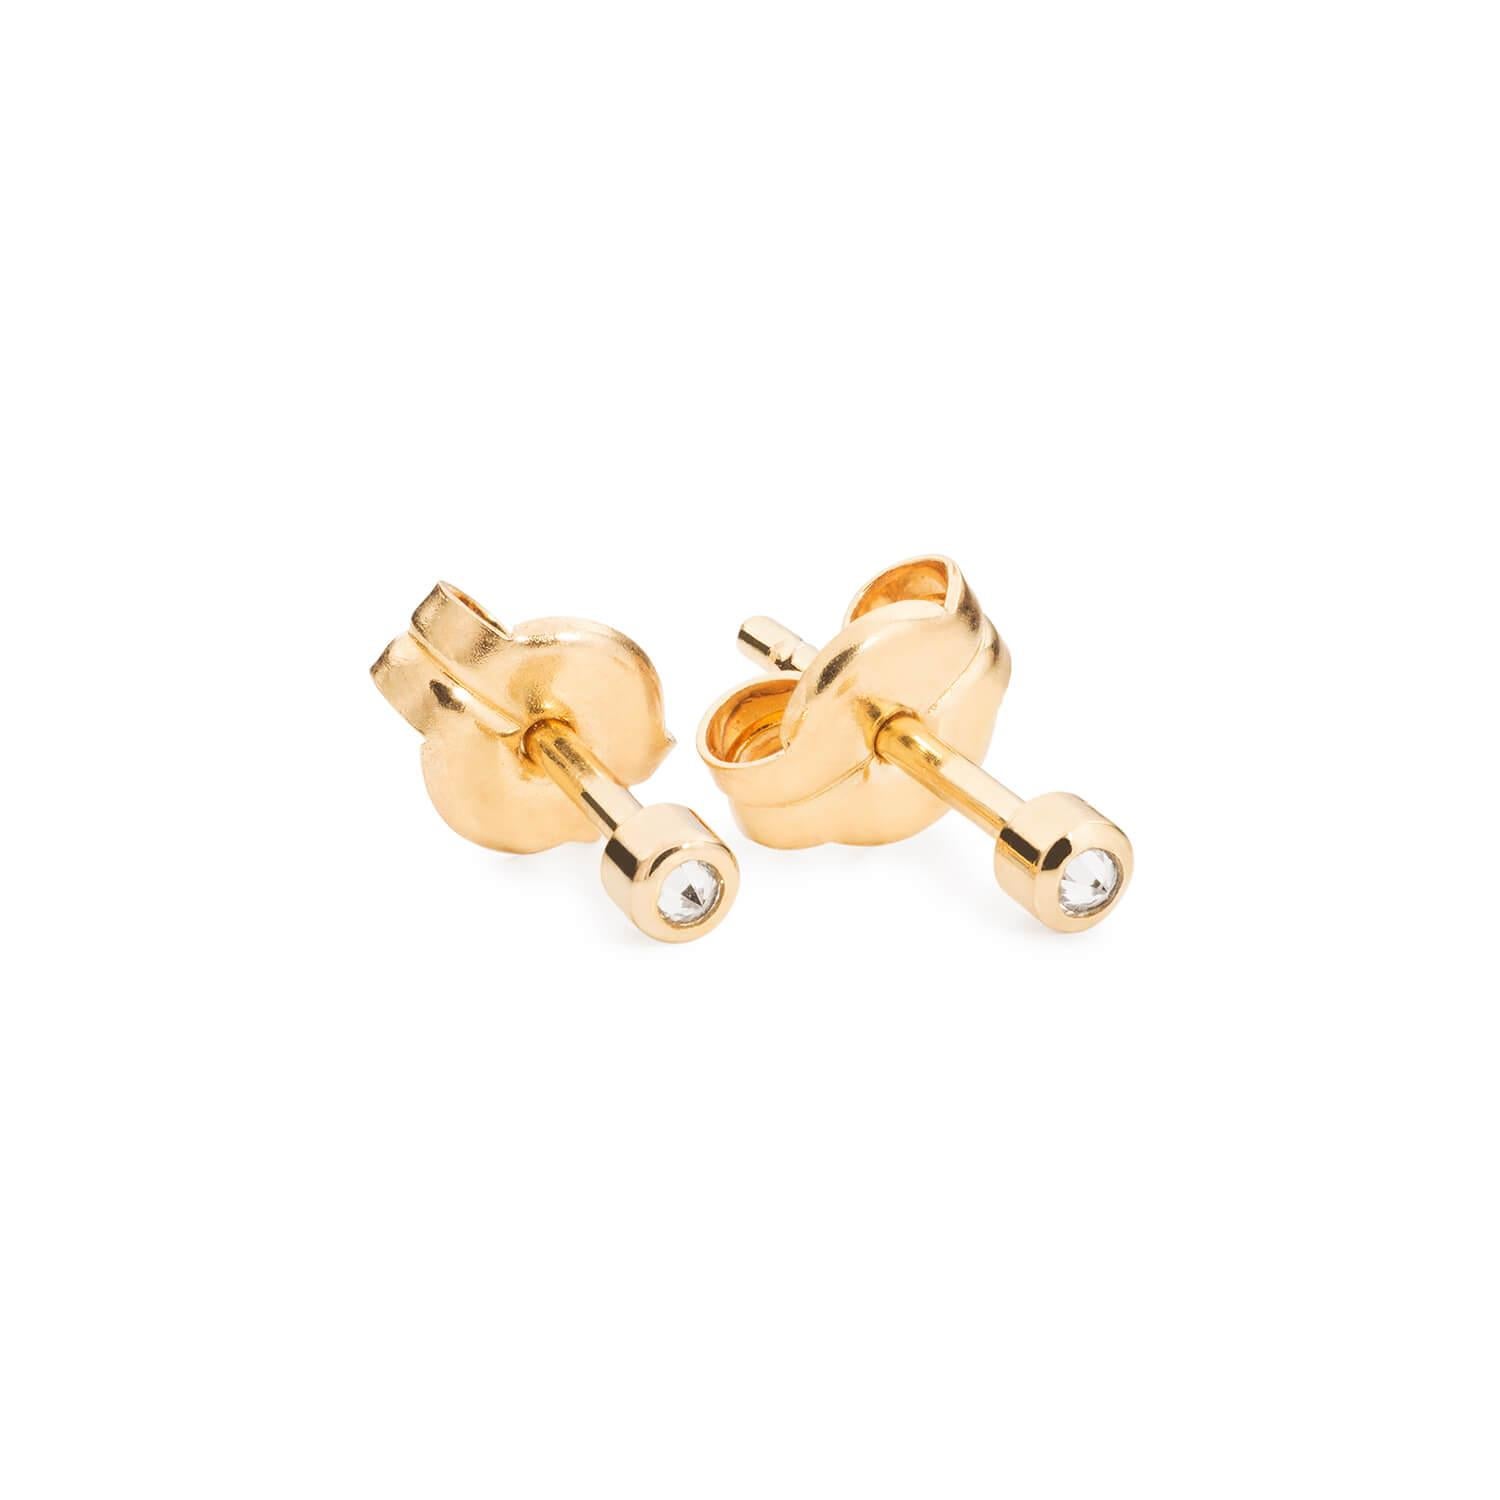 A delicate and classic stud earring featuring an inverted set brilliant cut diamond.
Handcrafted in Spain from certified good delivery 18k yellow gold and a certified non conflict top Wesselton diamond, 0.015cts.
Available in other hues of gold